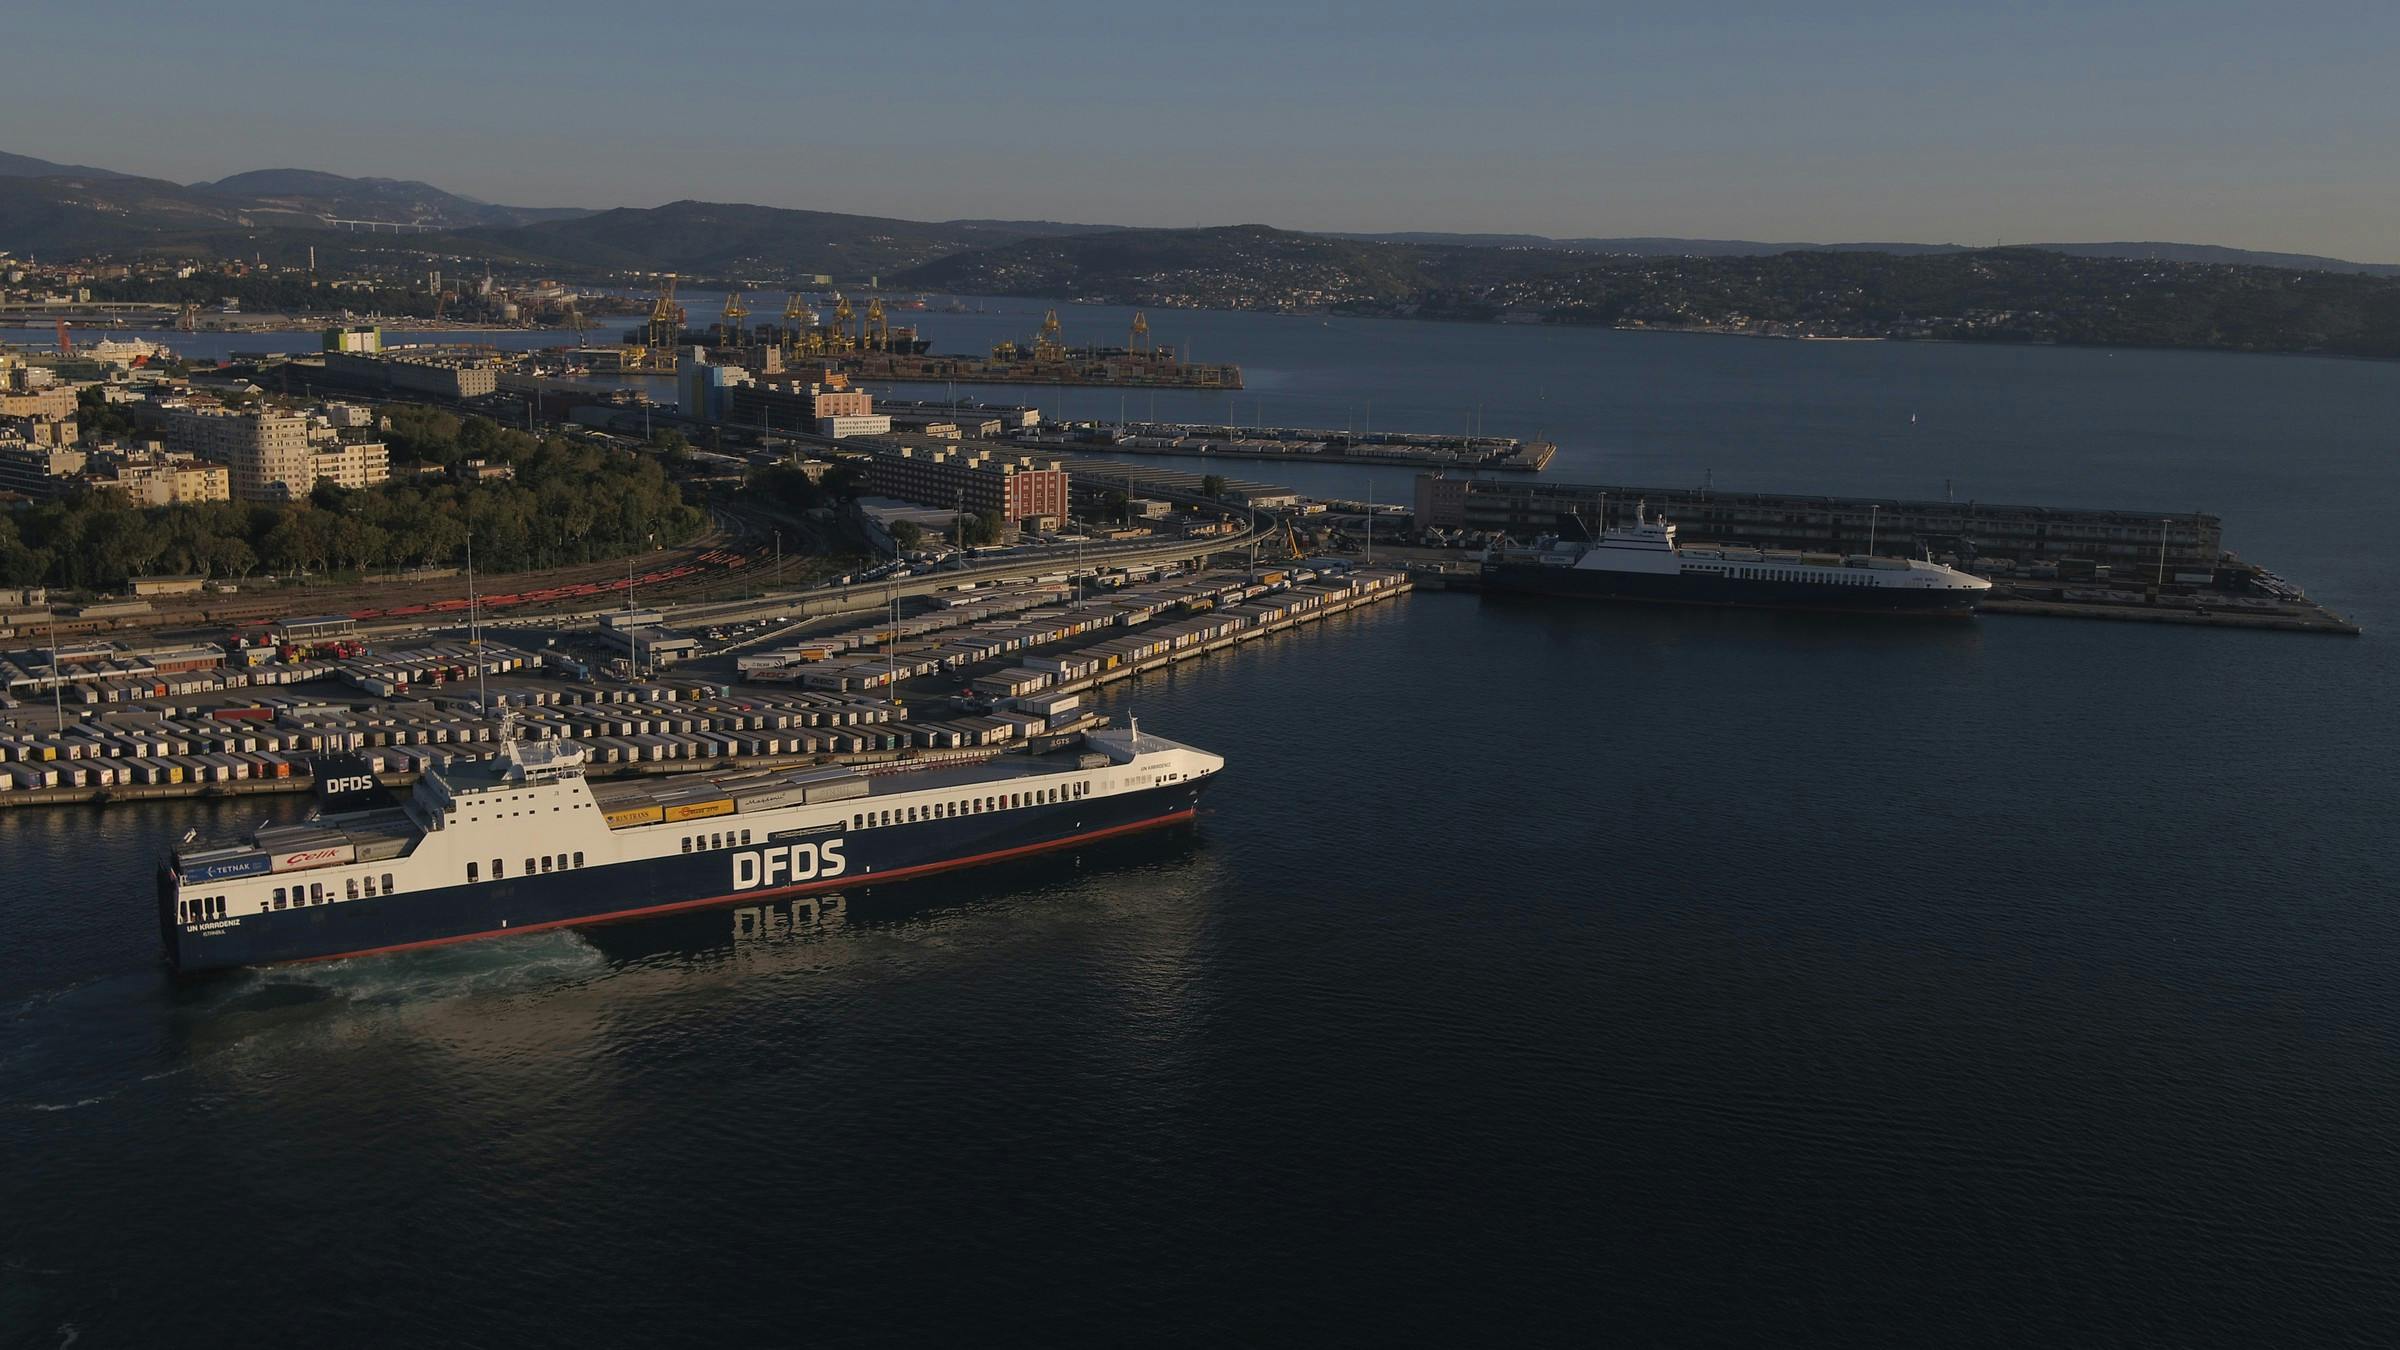 DFDS vessel in shore with cargo, drone image